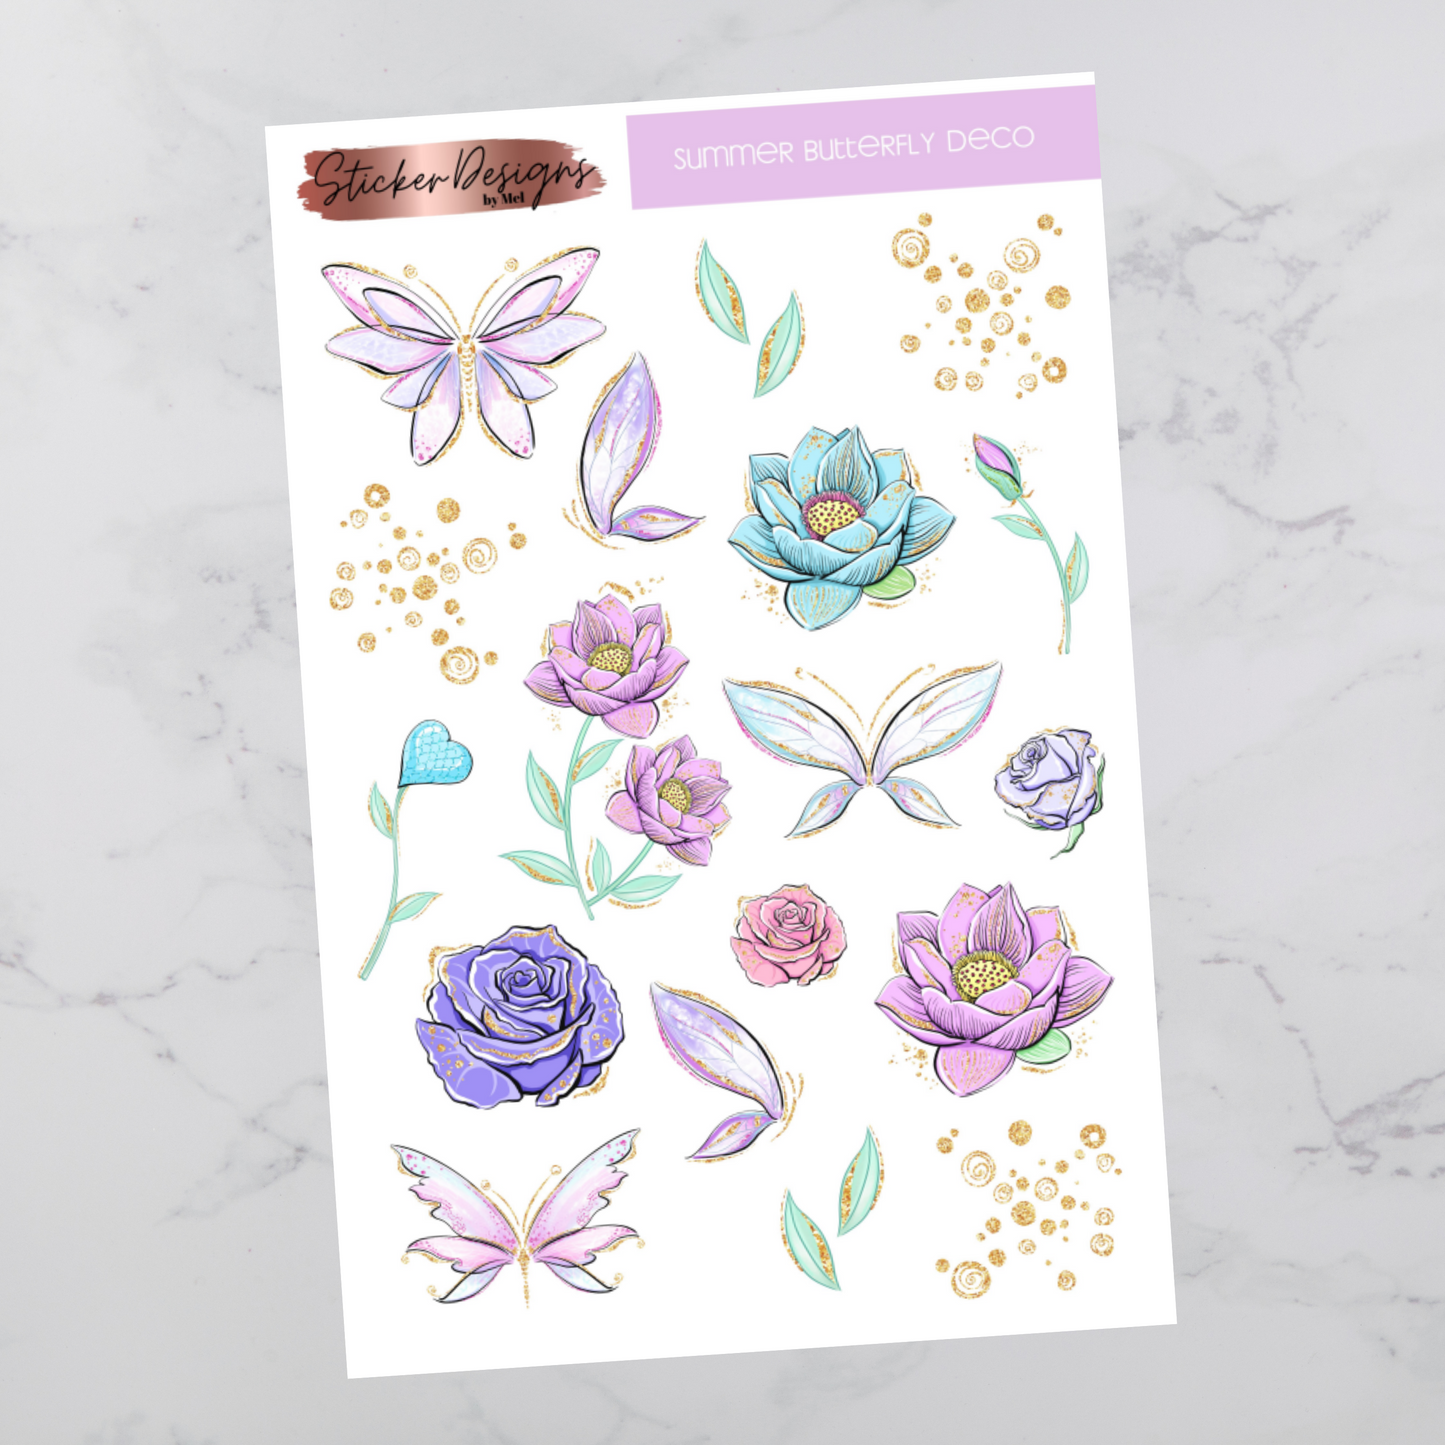 Summer Butterfly - Deco Stickers